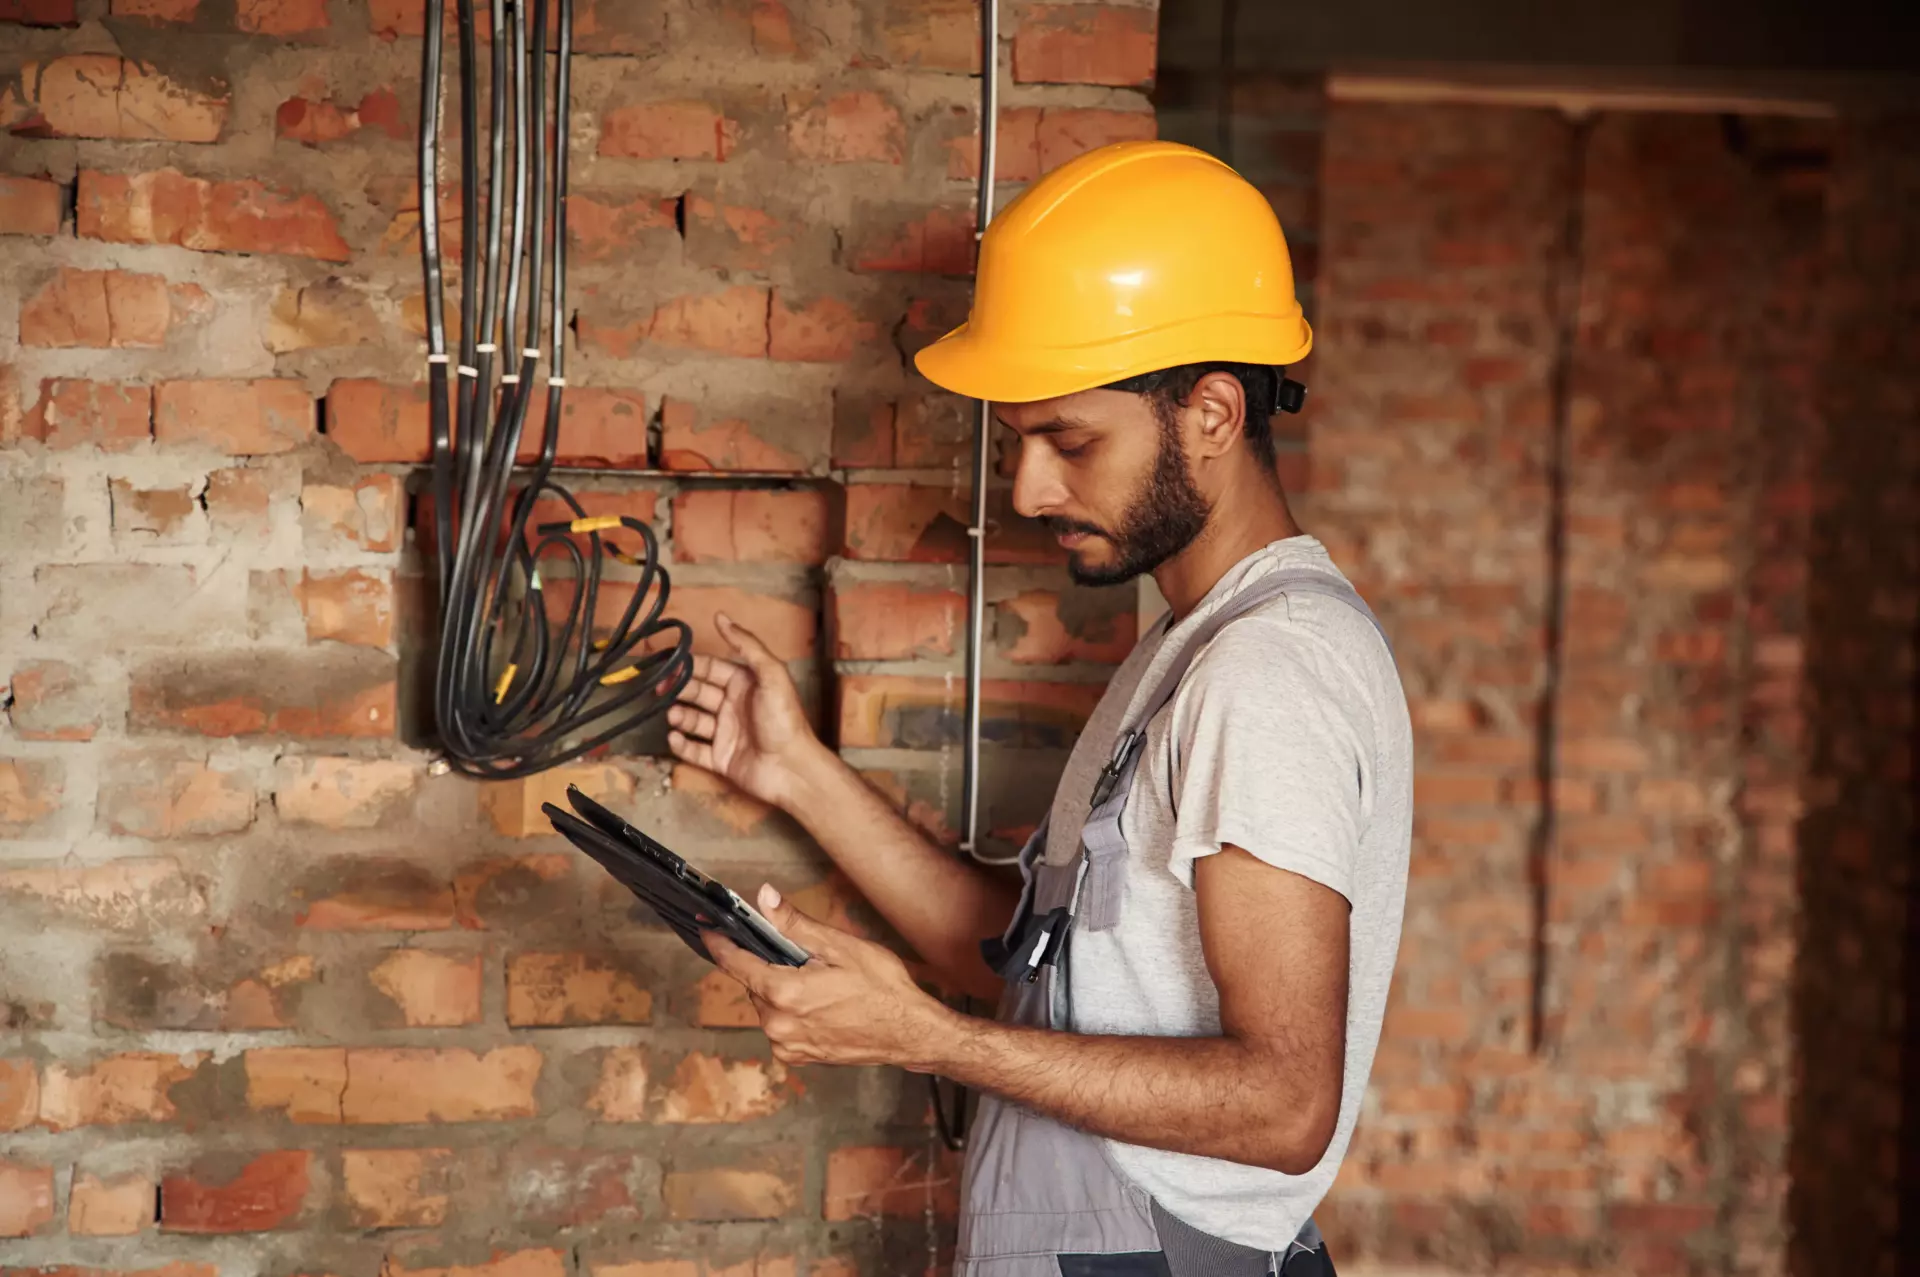 A man wearing a hard hat holds a tablet in one hand and points to some wires in a brick wall with the other.